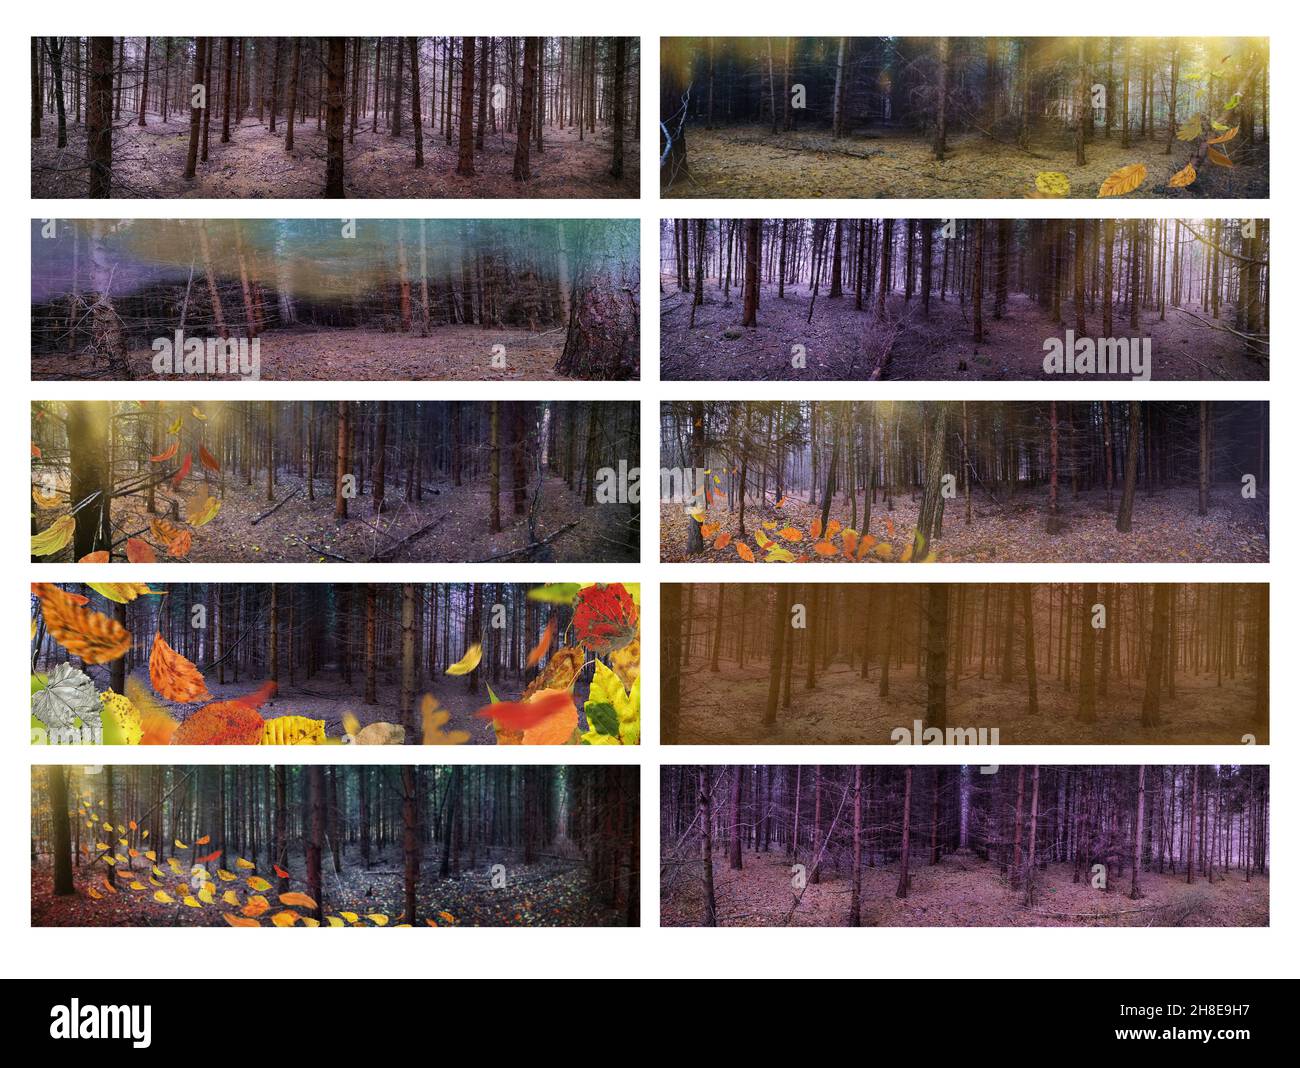 Panoramic photo of forest in autumn with colorful autumn leaves. Wide format photos collage. Stock Photo